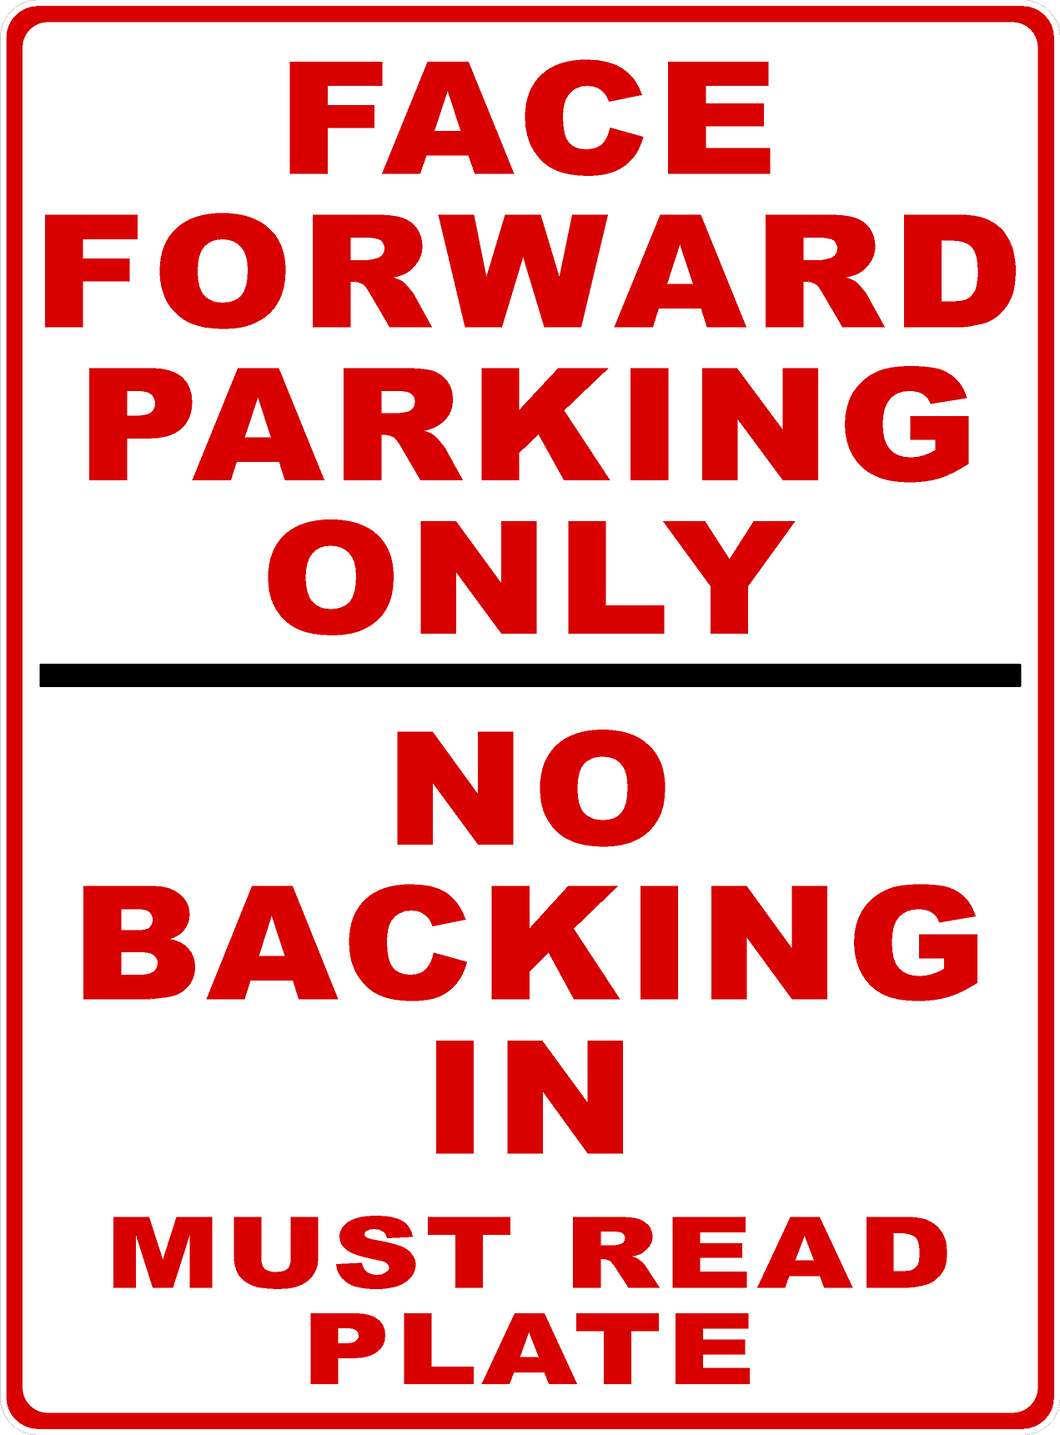 Face Forward Parking Only Do Not Back In Must Read Plate Sign